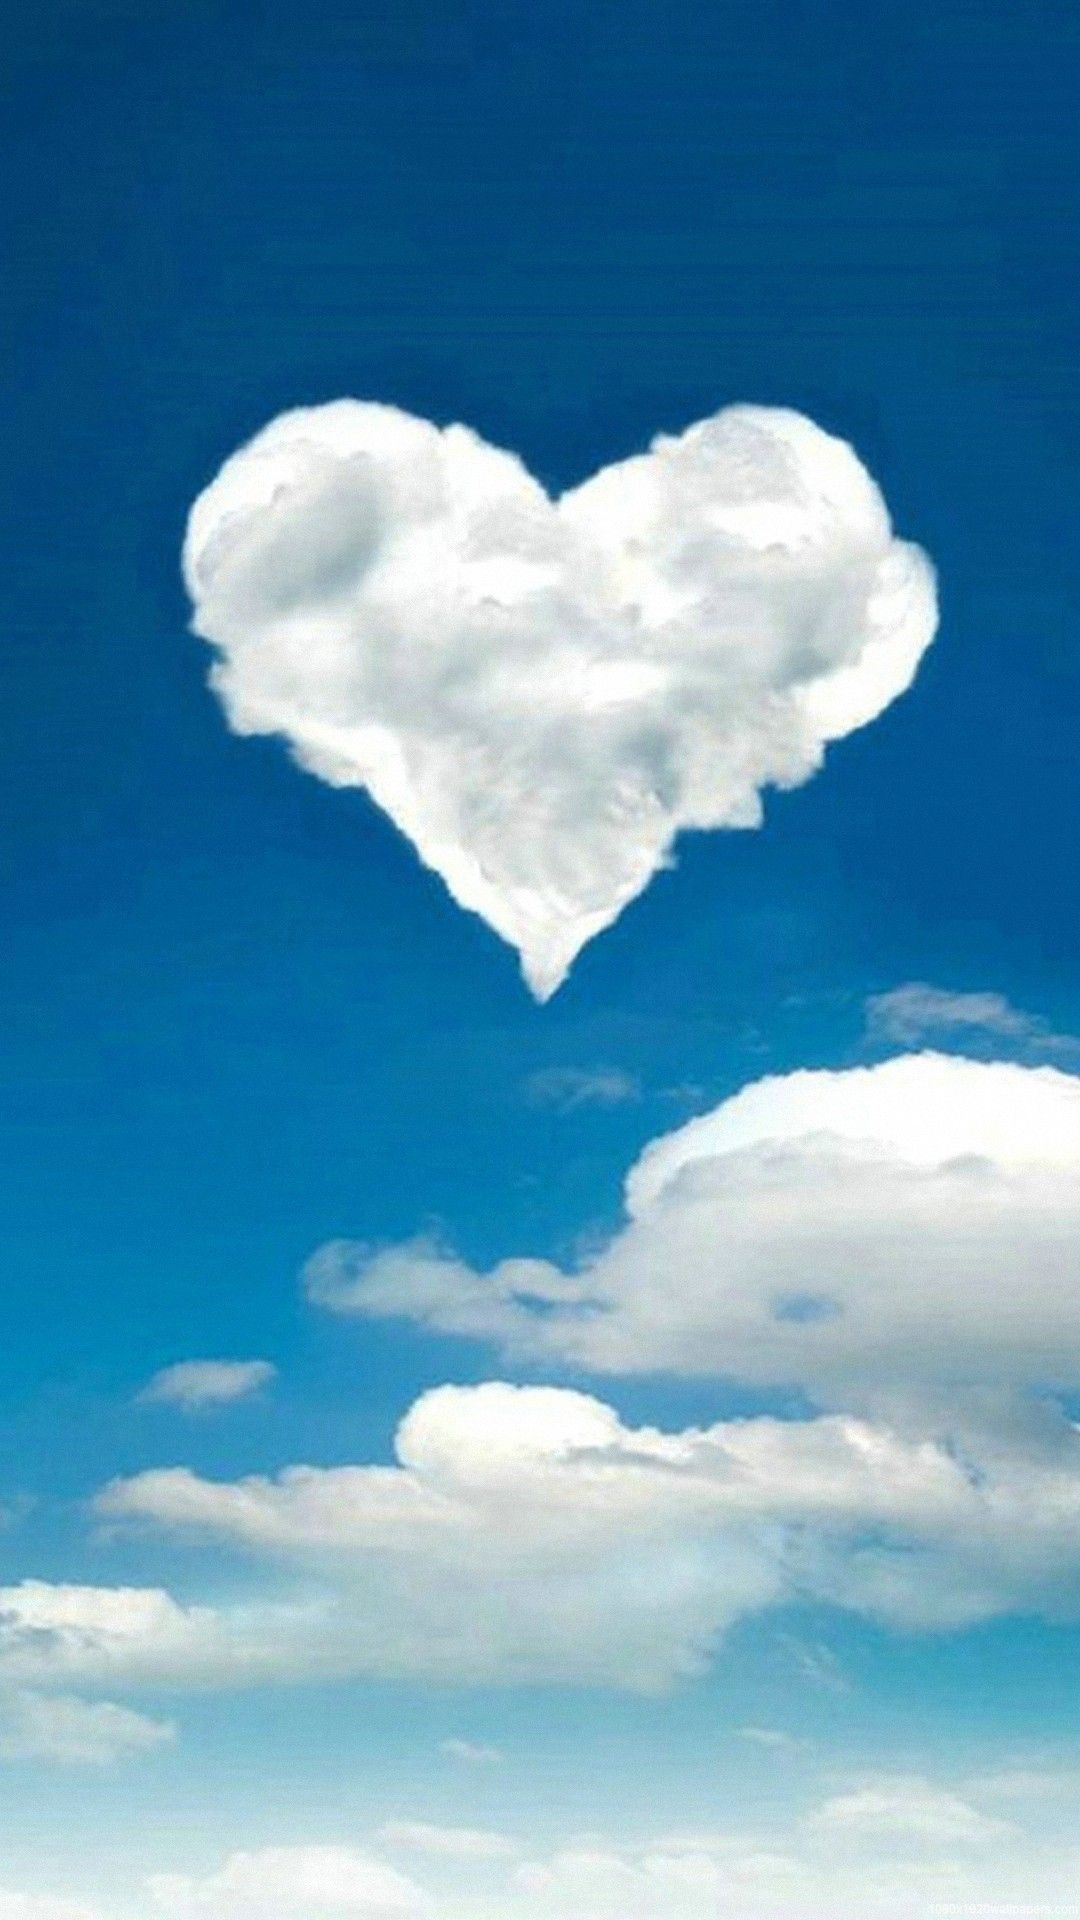 Heart clouds. iPhone Wallpaper. iPhone wallpaper hipster, Love wallpaper download, HD wallpaper for mobile